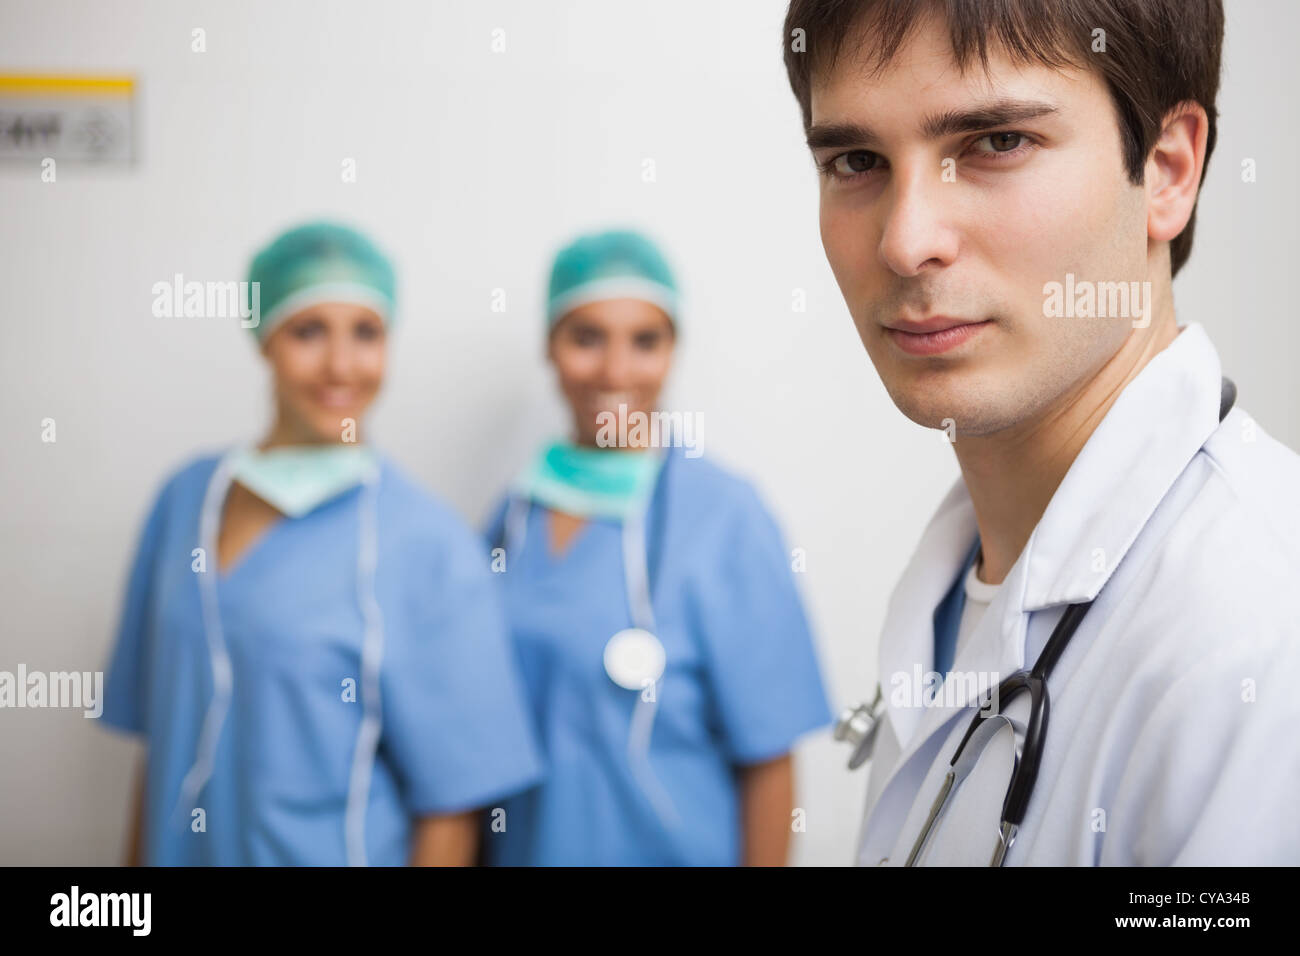 Satisfied doctor with two nurses Stock Photo